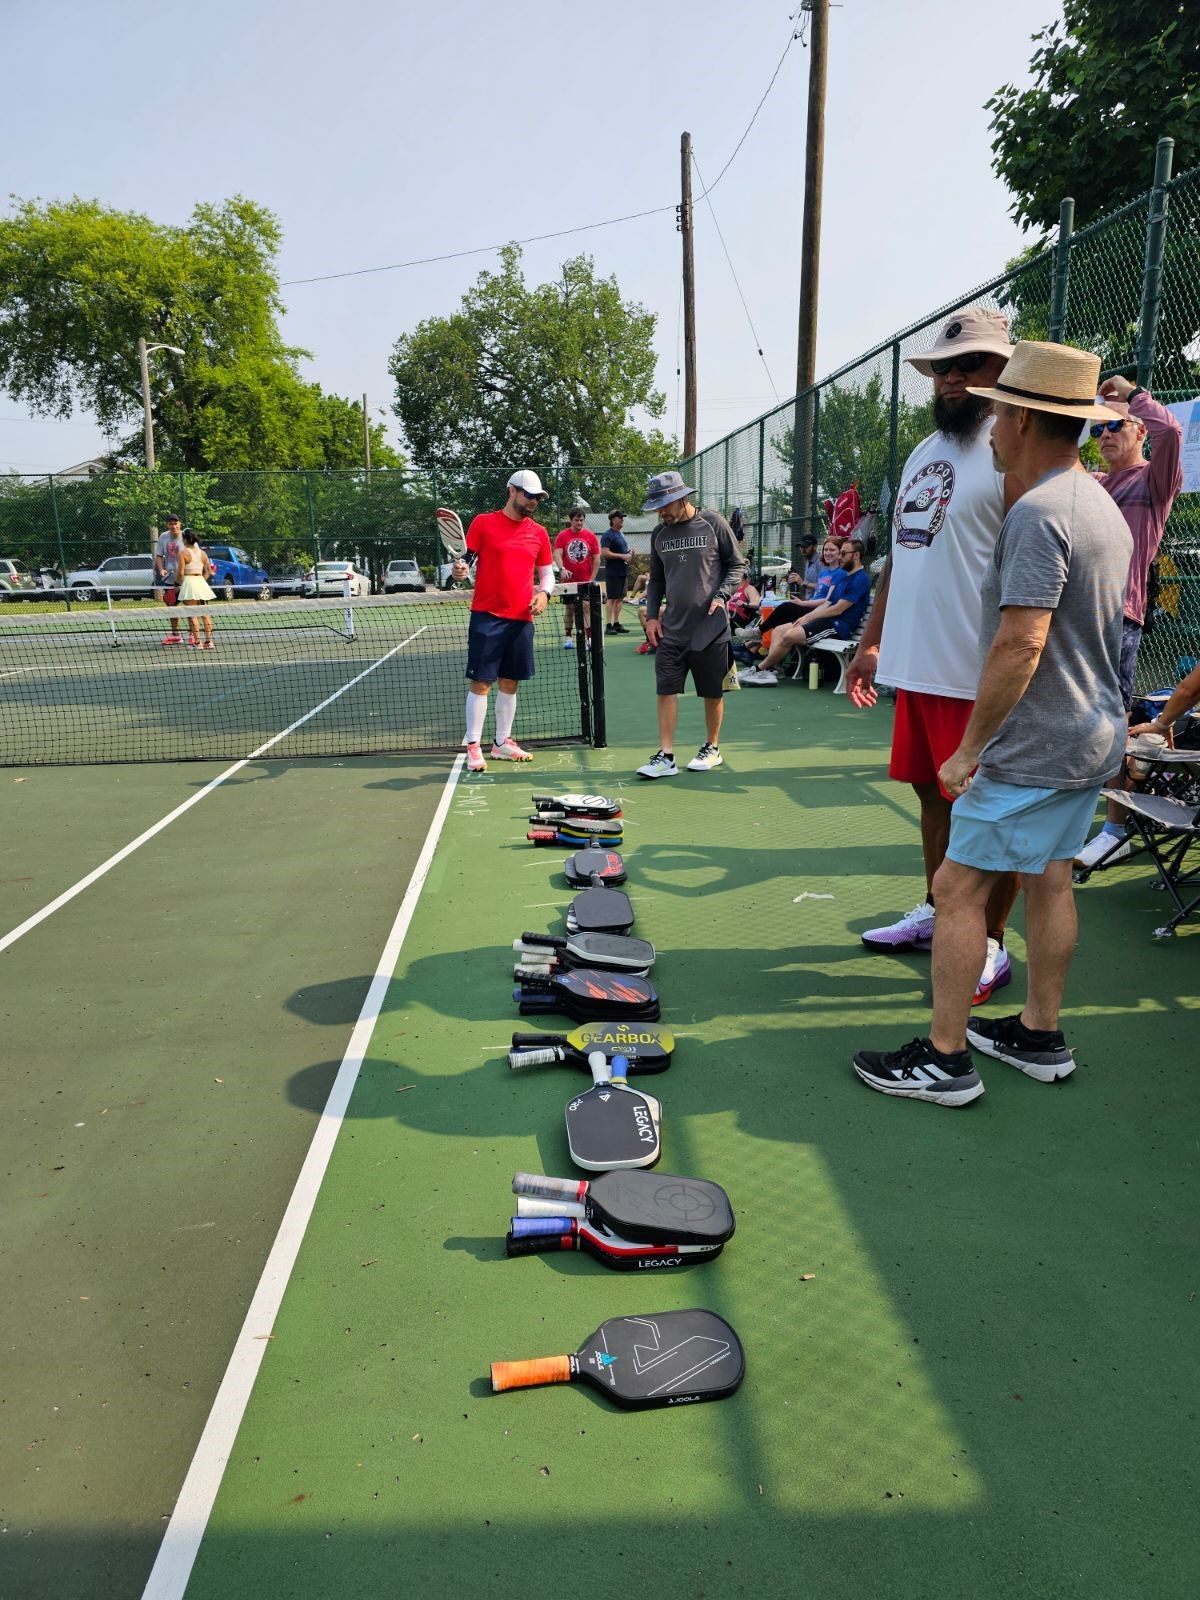 Metro Parks Issues Program That Drastically Limits 80+ Pickleball Players